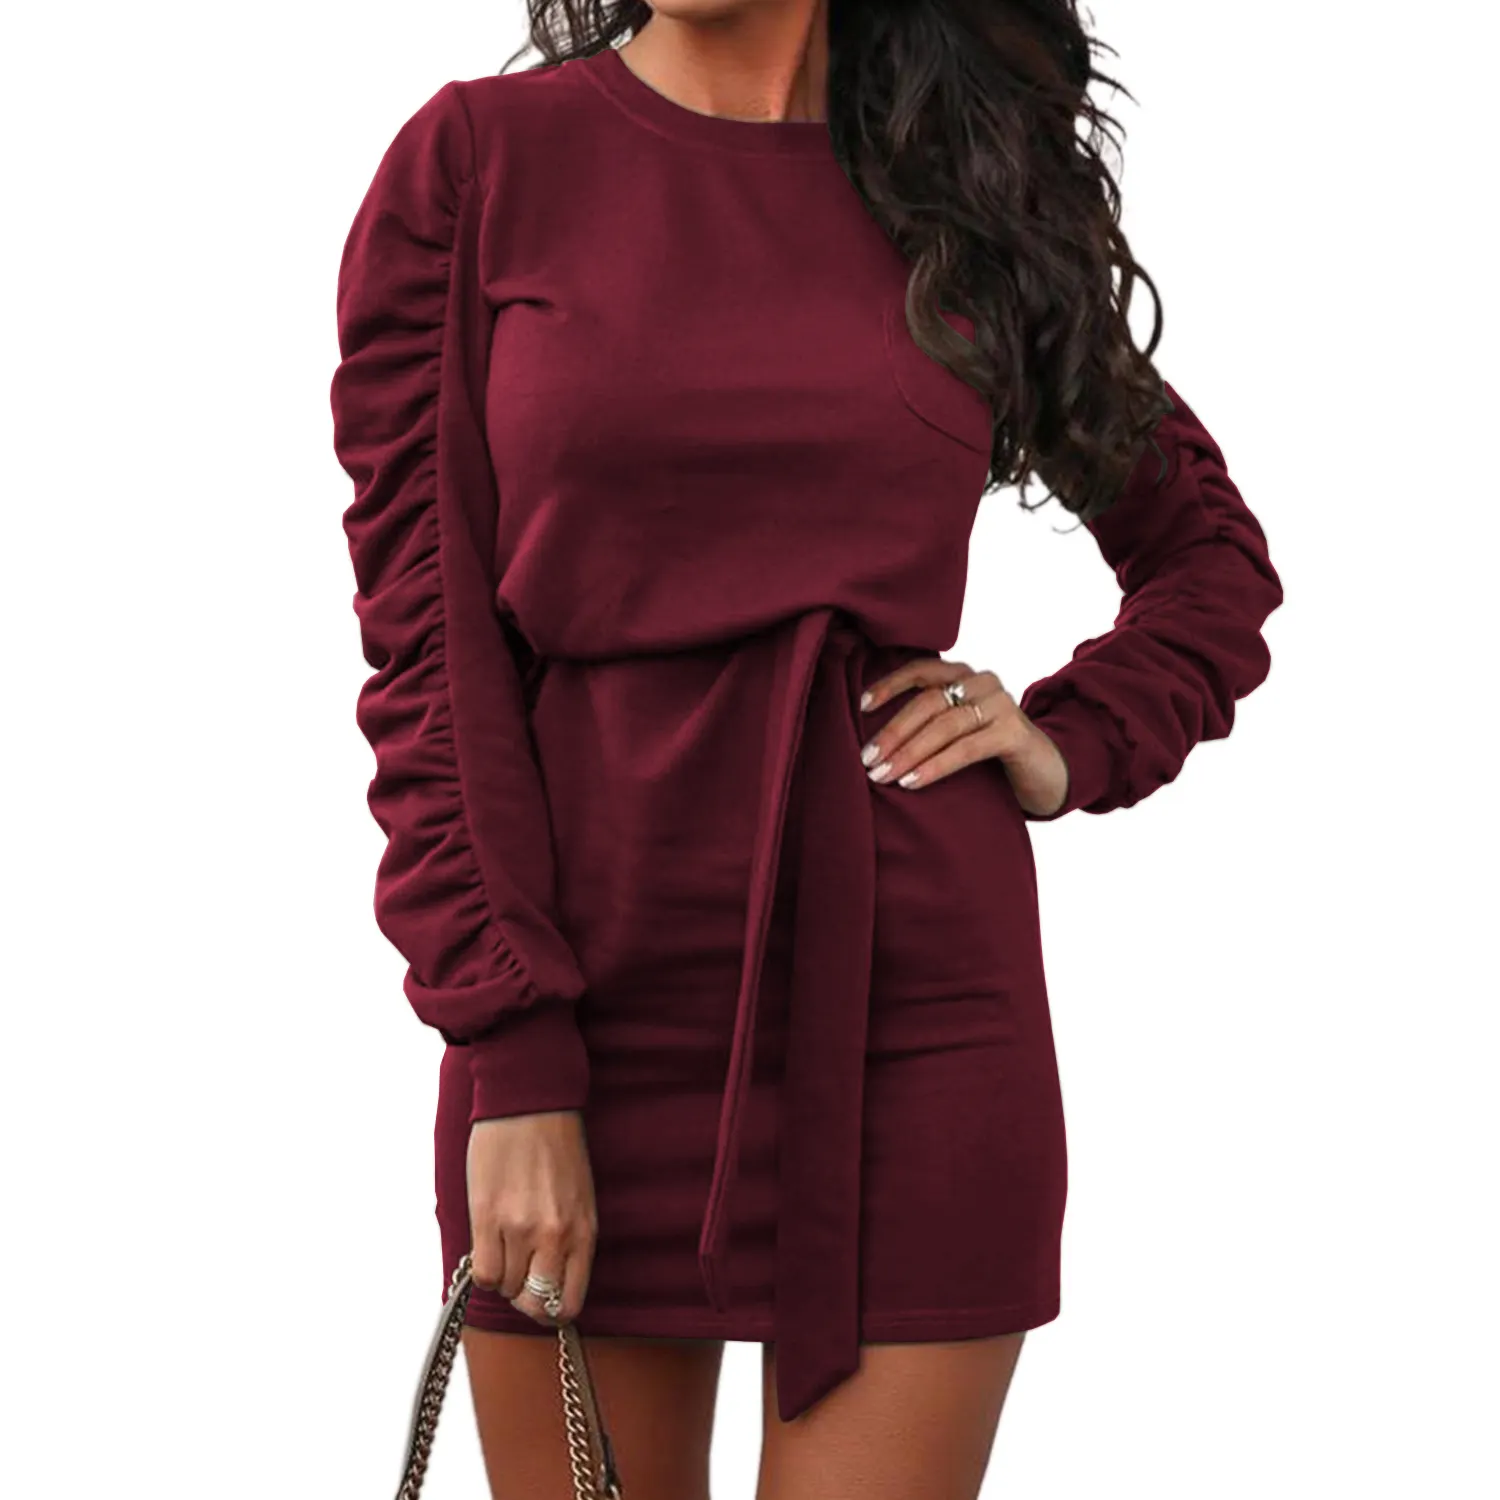 BEST SELLING Daily Wear Solid Casual Dress Long Ruffled Sleeve Knit Dresses with Sashes